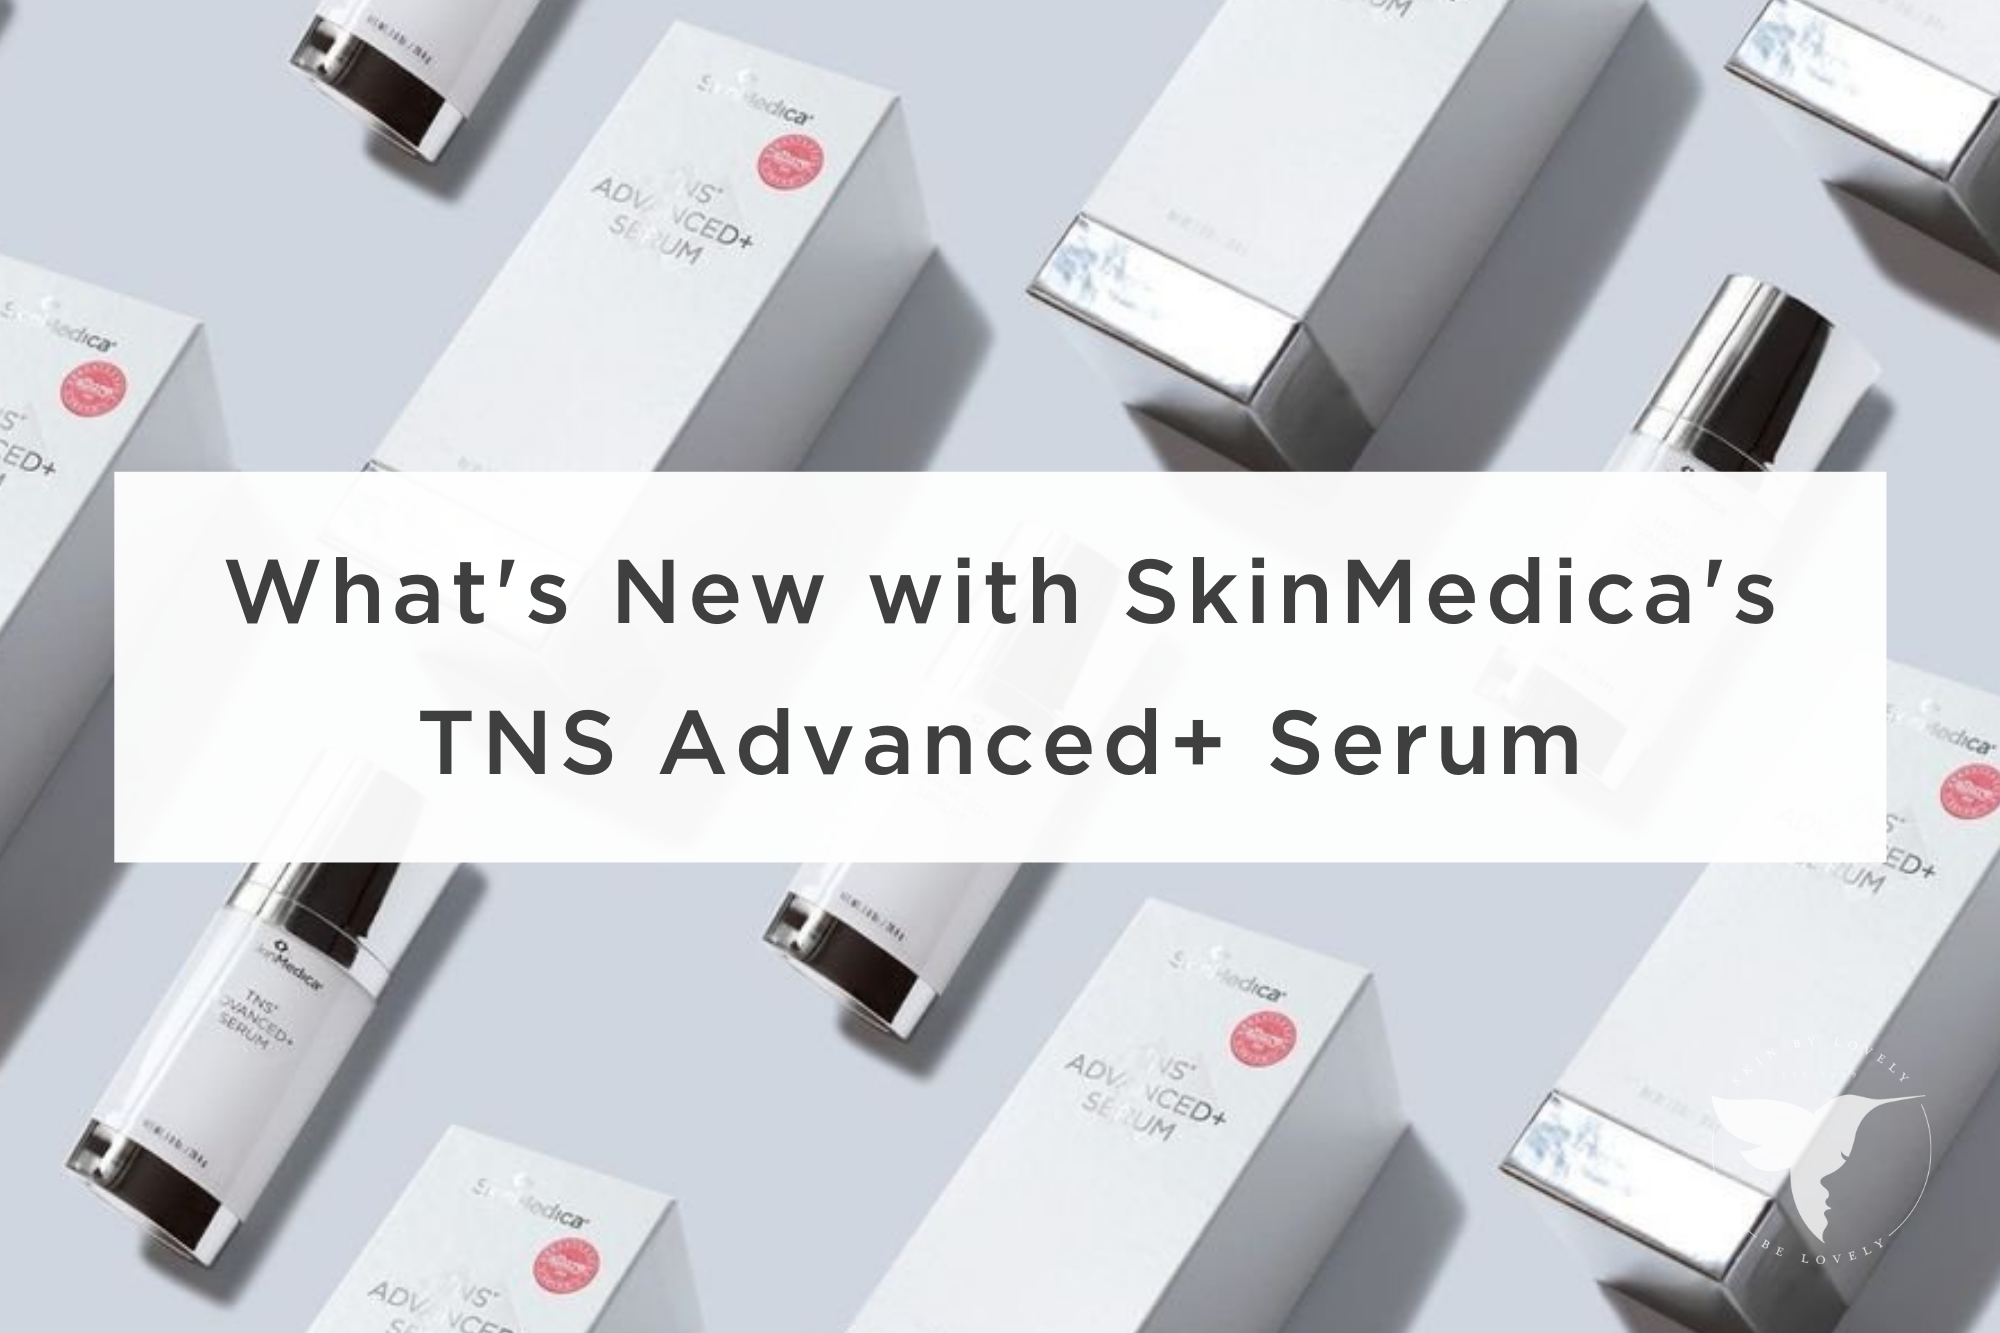 What’s New with TNS Advanced+ Serum